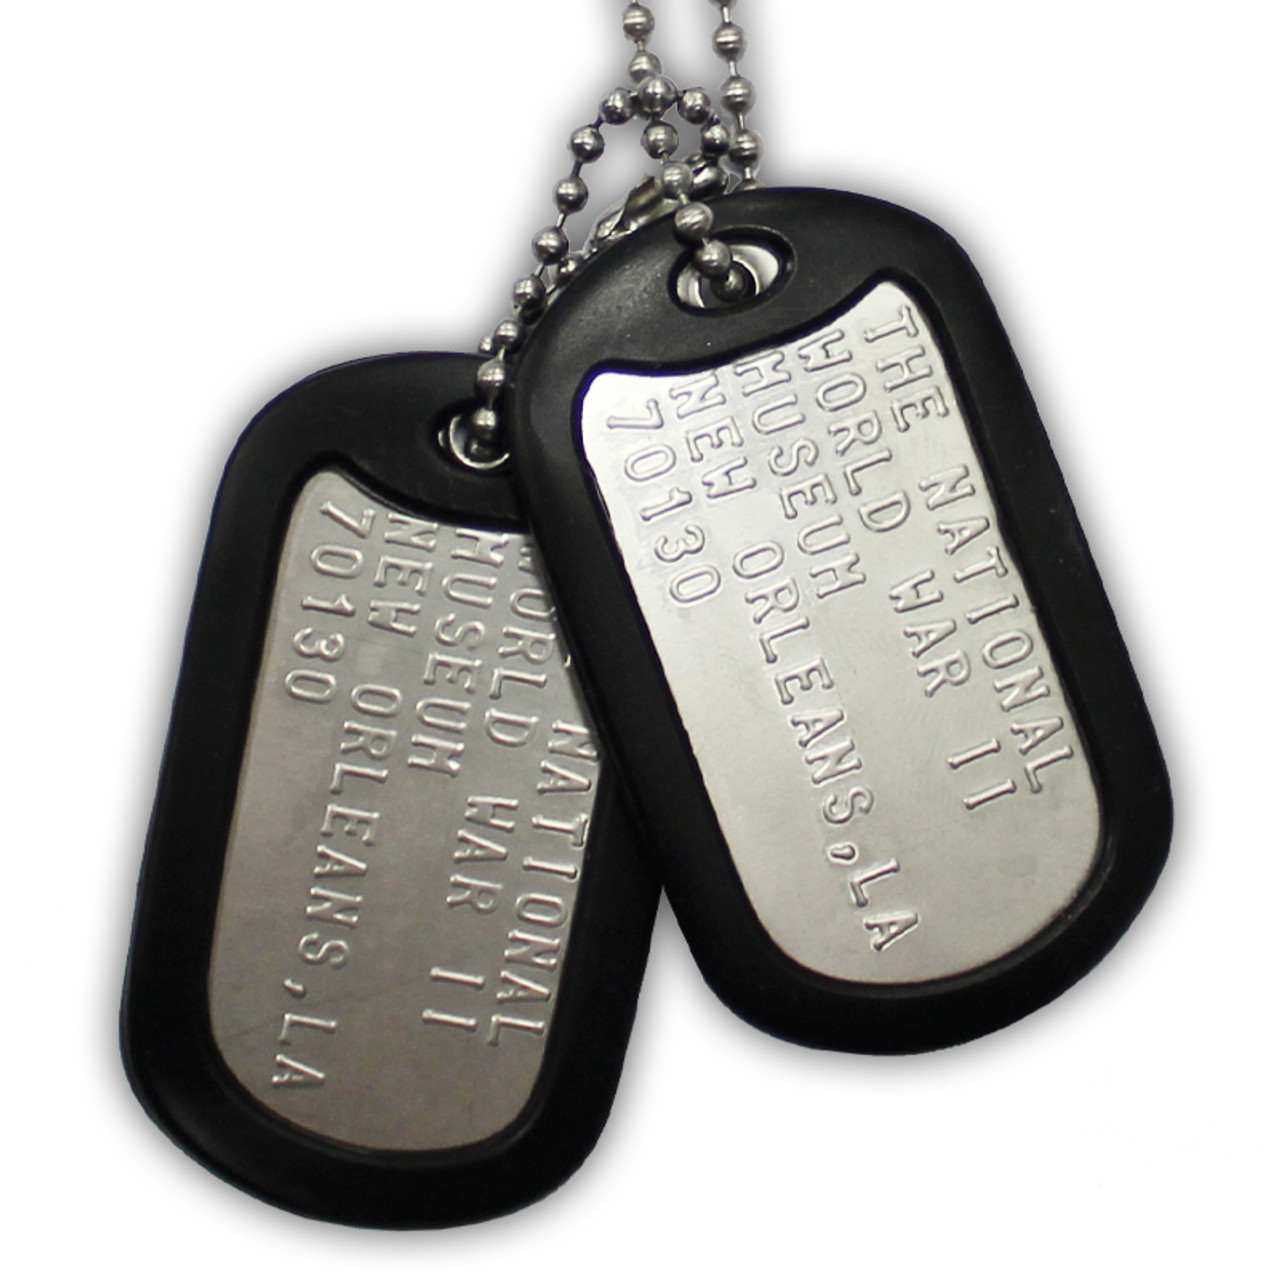  Military Army Style Stainless Steel Black Double Dog Tags  Pendant Necklace for Men, Bead Chain Sweater Necklace Jewelry Gifts for Men  Black : Clothing, Shoes & Jewelry